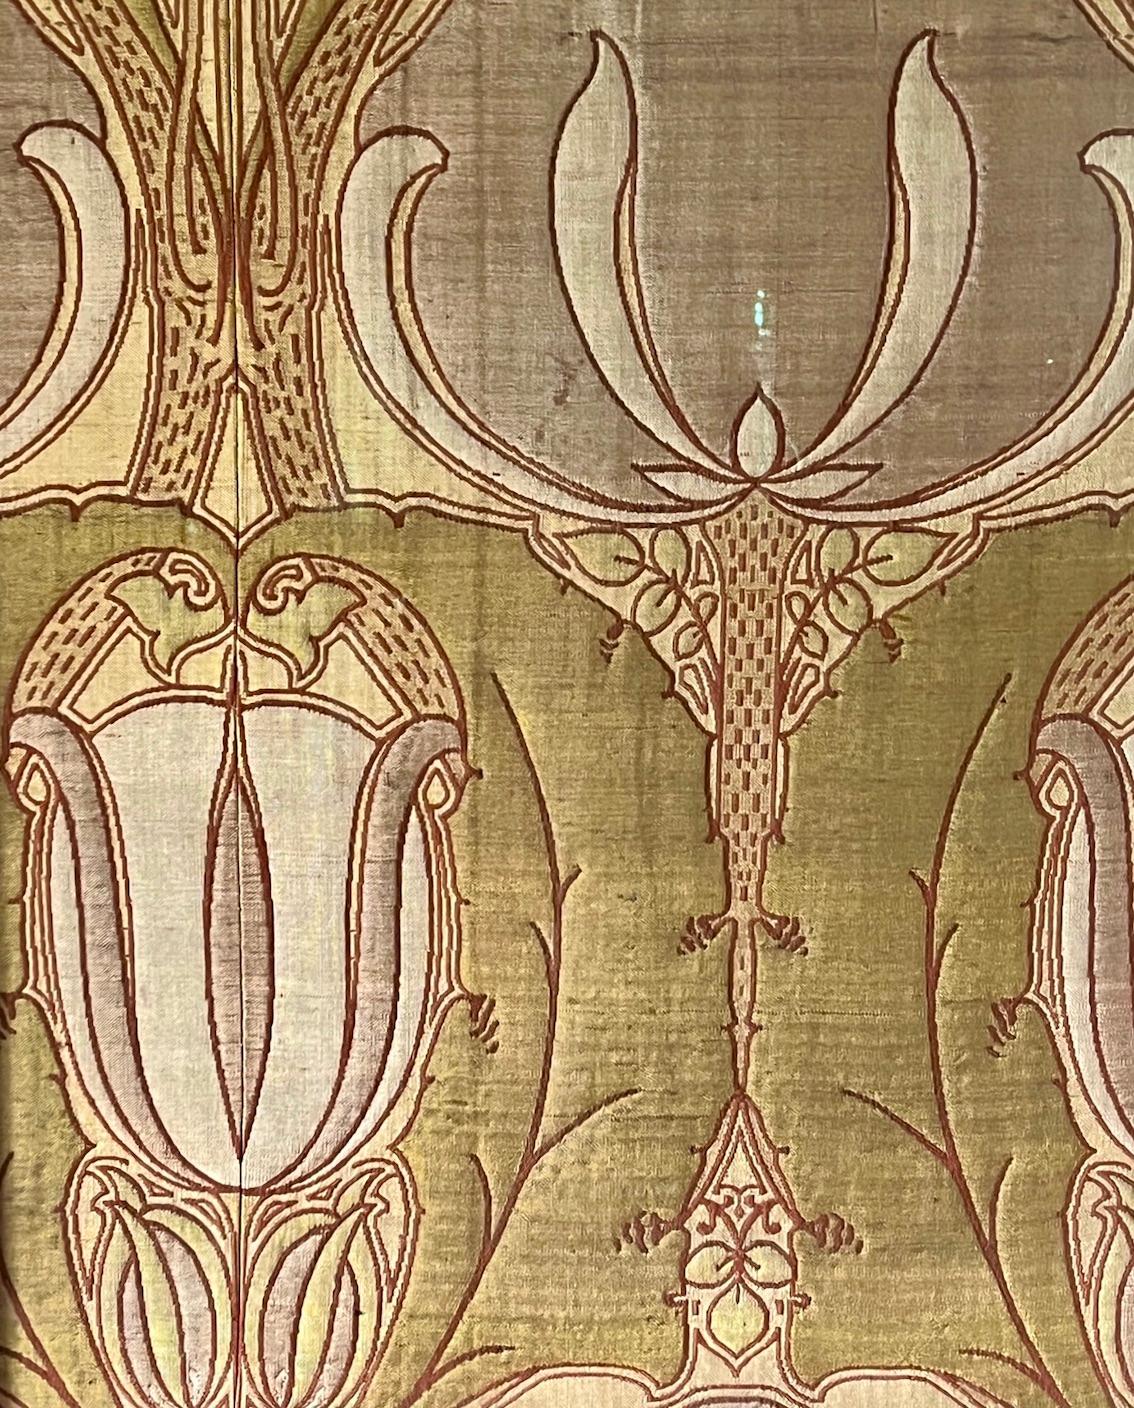 This is a wonderful rare Arts & Crafts framed textile

Jacquard woven silk, wool and cotton

It was woven by Alexander Morton & Co

Circa 1900

Design attributed to C.F.A Voysey

Height 106cm Width 70cm

Unframed Height 98cm Width 72cm

Alexander